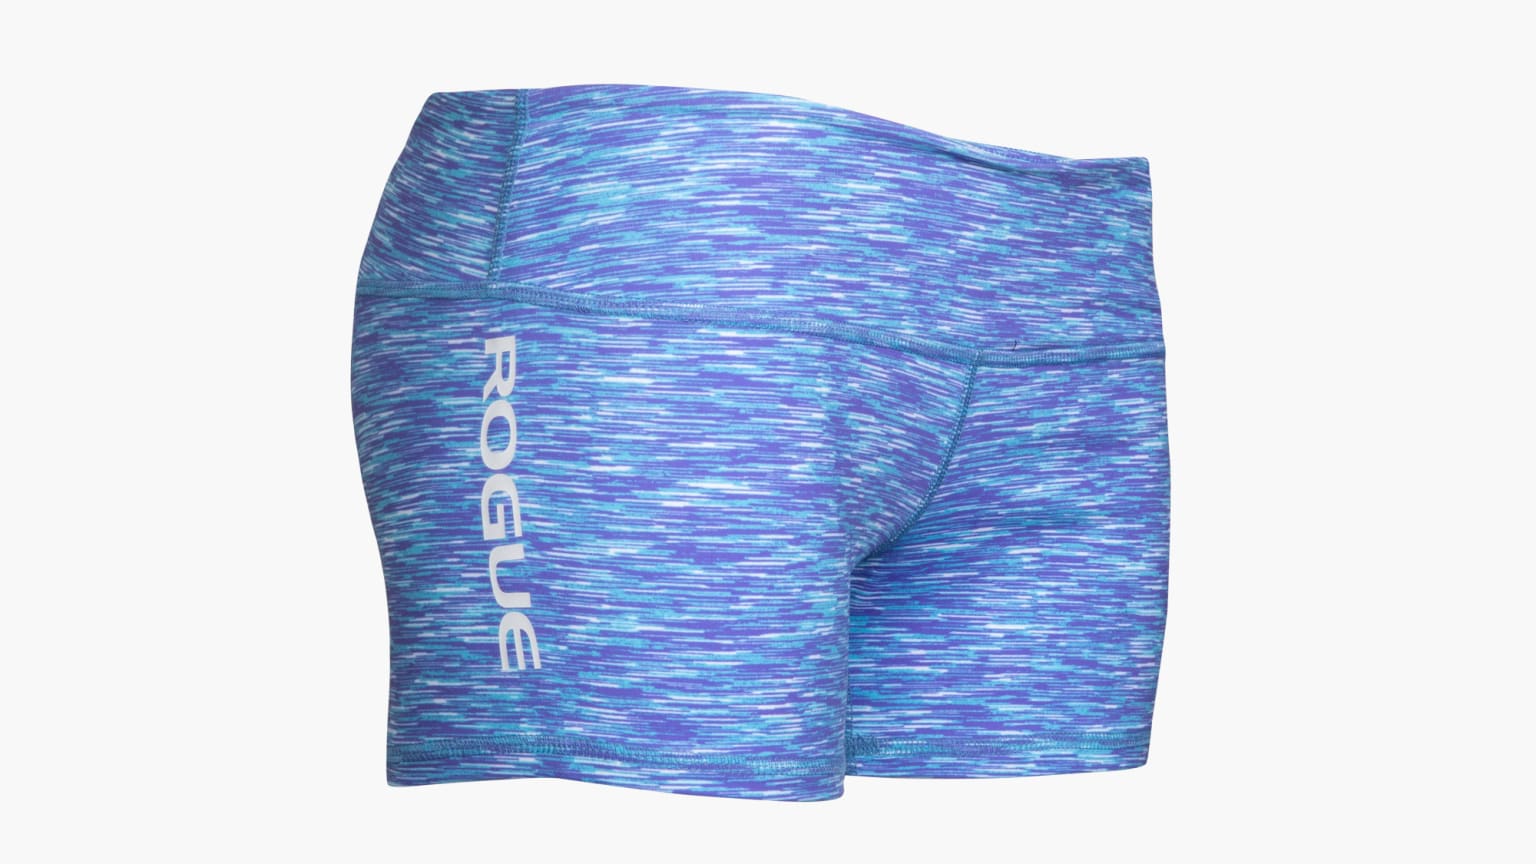 WOD Gear Clothing Wide Band Booty Shorts - Turquoise